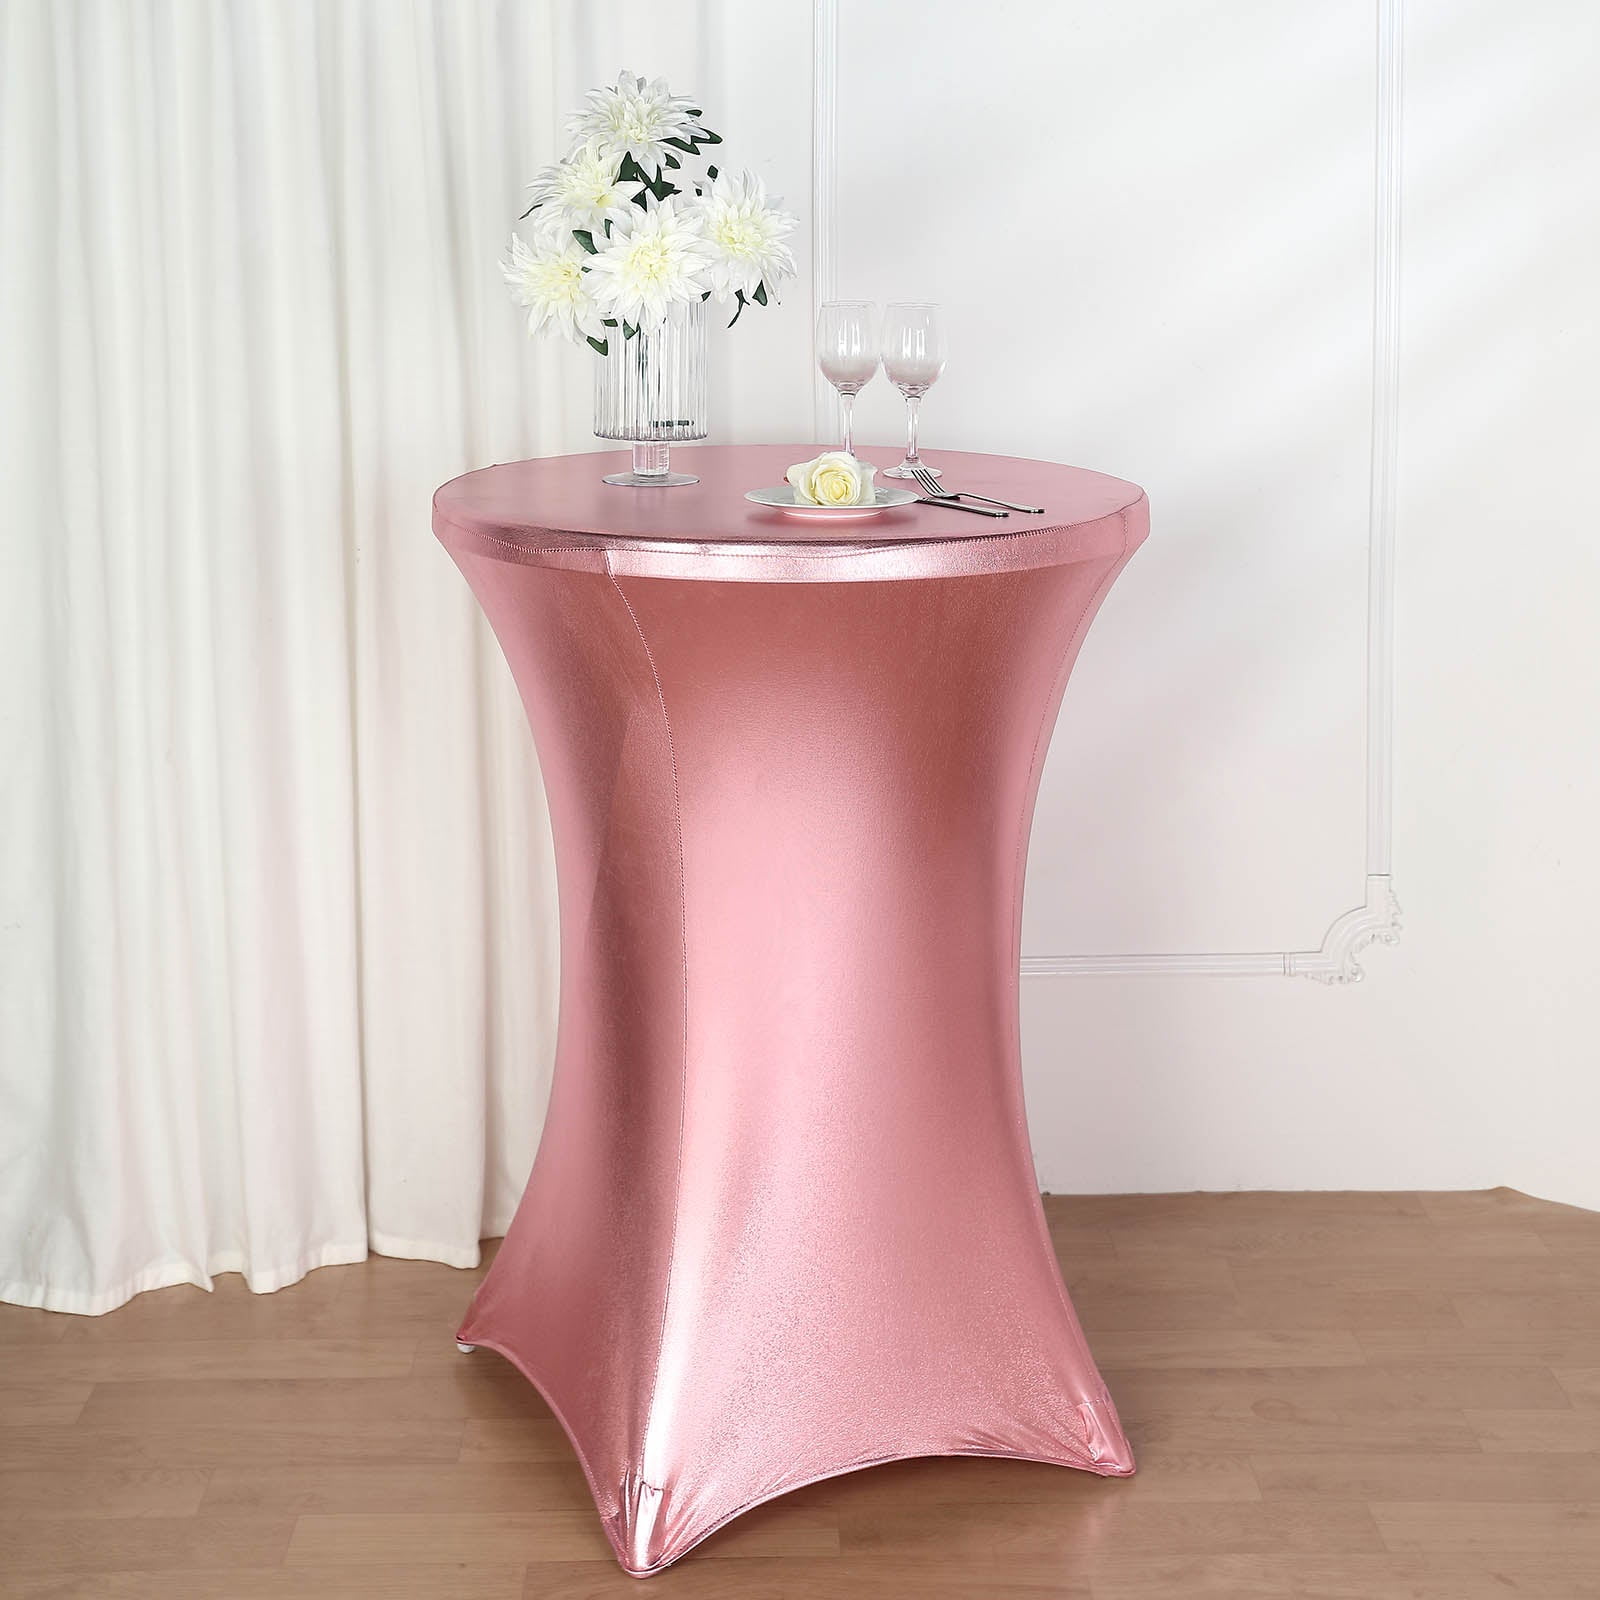 GOLD ROSE GOLD METALLIC LOOK TABLE COVERS SILVER 